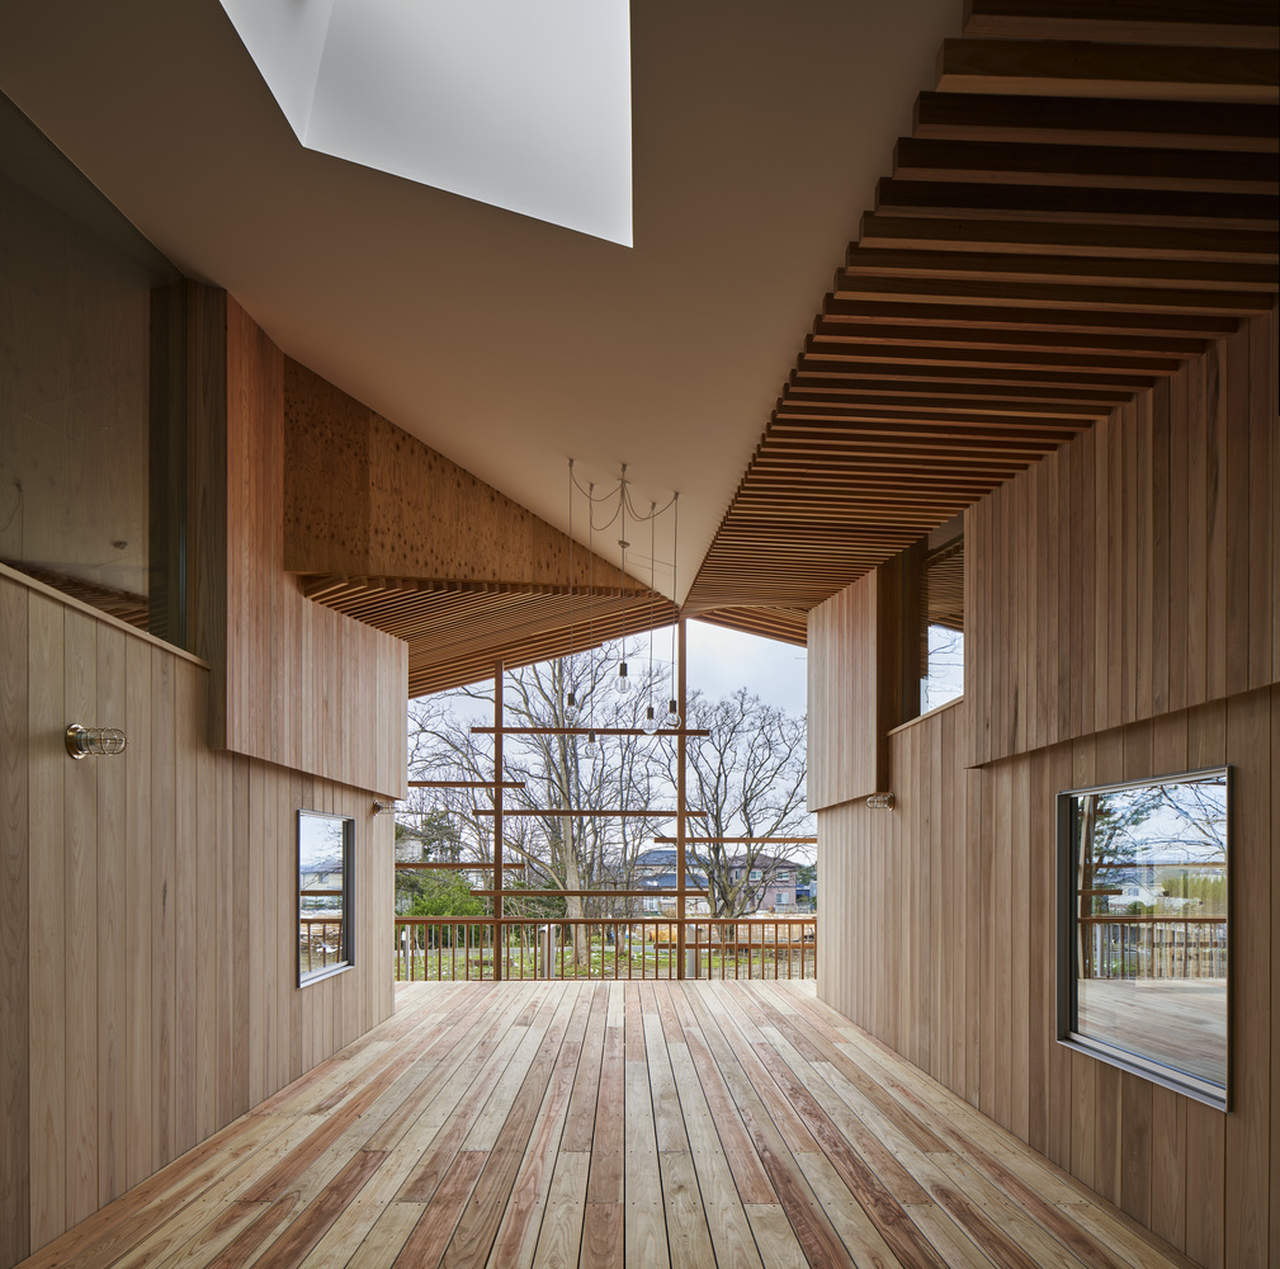 the center for early childhood education and care takeru shoji architects Easy Resize com